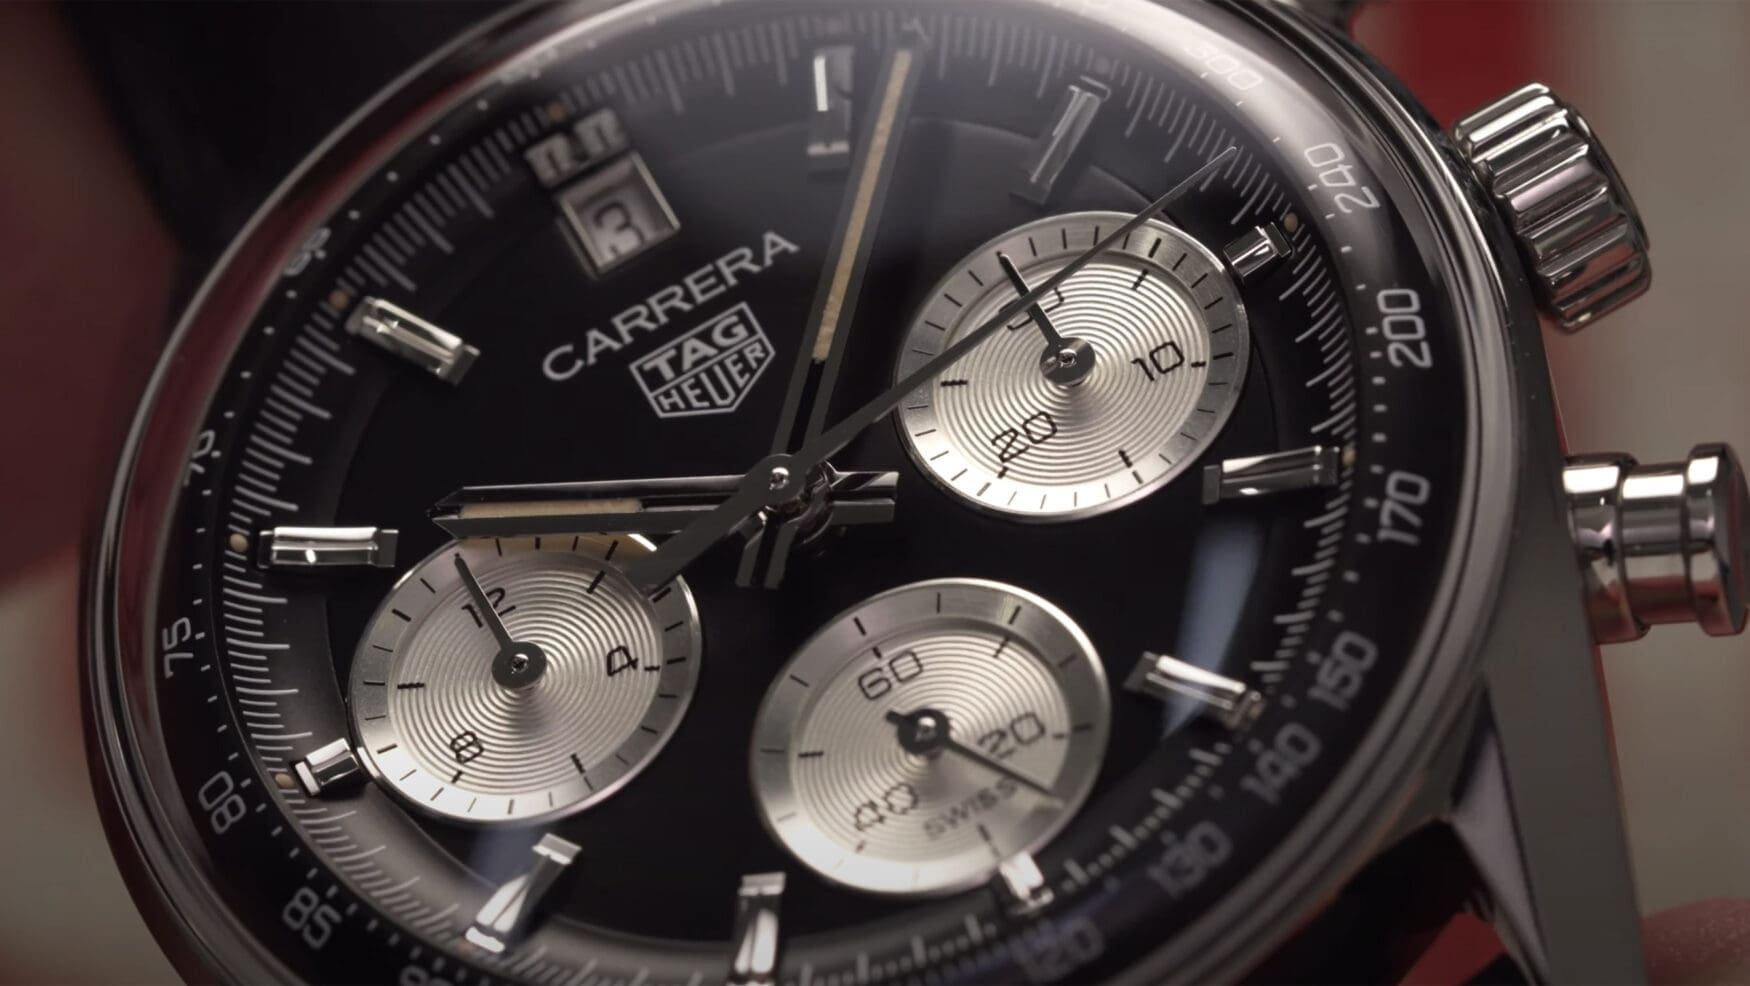 Celebrity watch challenge – do you pick the black or blue TAG Heuer Glass Box Carrera Chronograph?